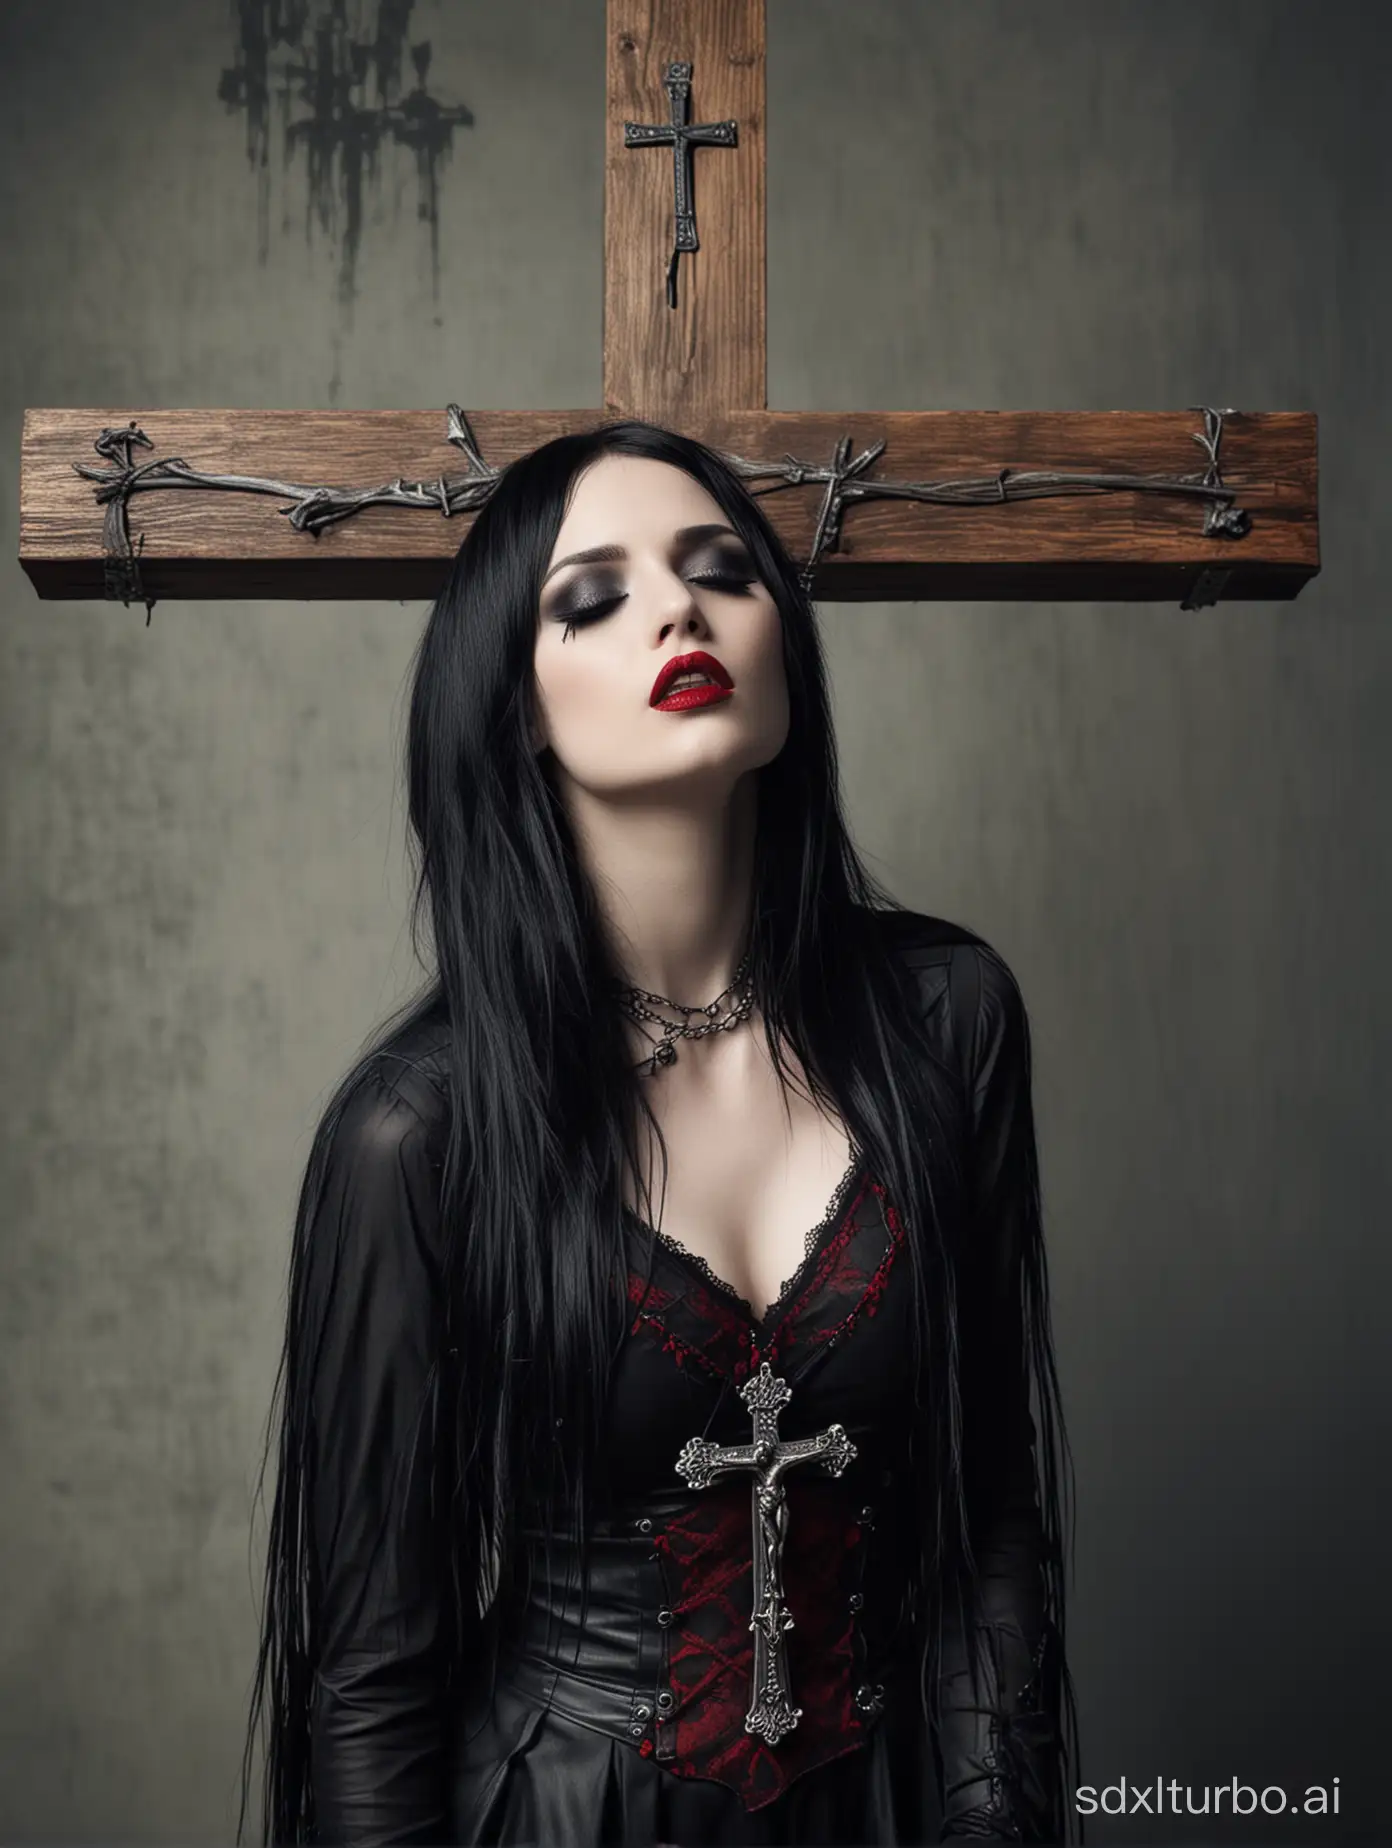 Gothic-Style-Portrait-Enigmatic-Woman-Crucified-on-a-Cross